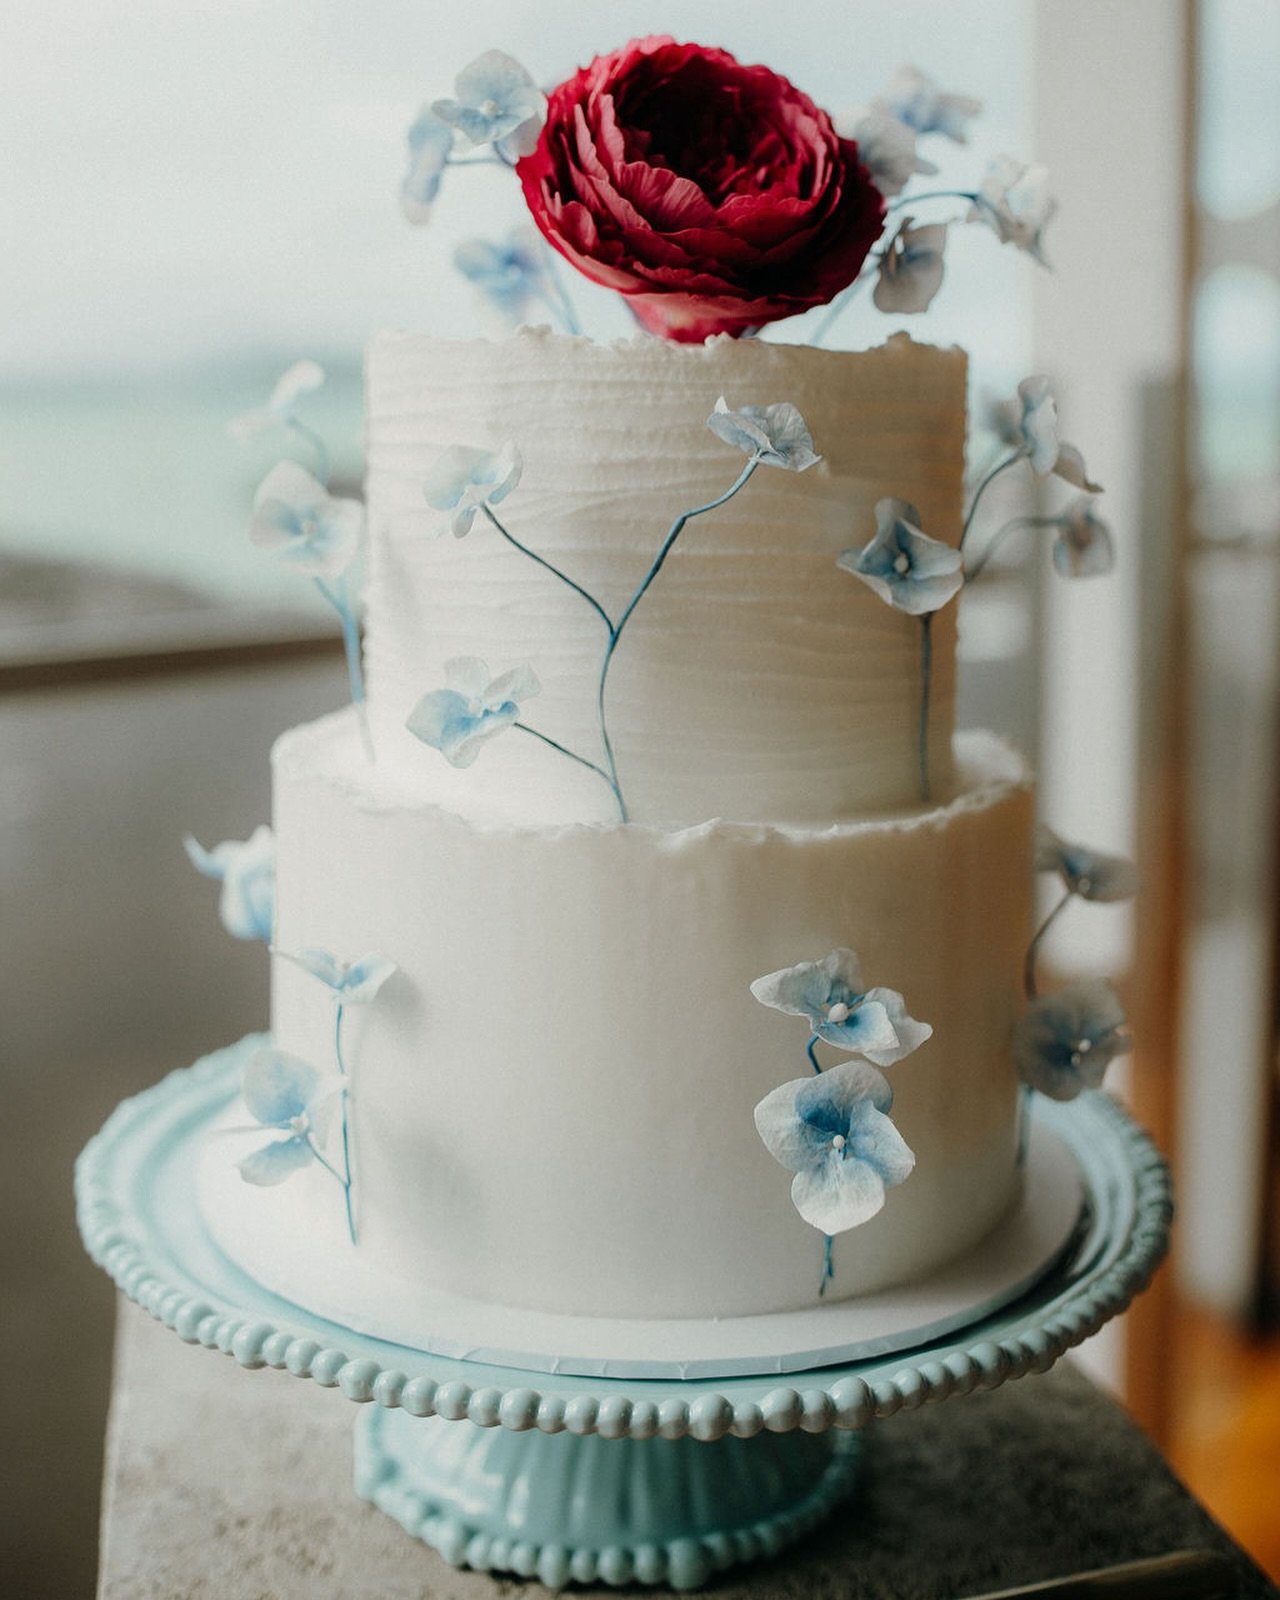 LOVE // A delicious wedding cake featuring delicate sugar art florals for a romantic modern wedding. 💙 Check out this gorgeous &lsquo;Echoes of Passion&rsquo; wedding styled shoot on our website now to see all the inspiring ideas and the talented ve